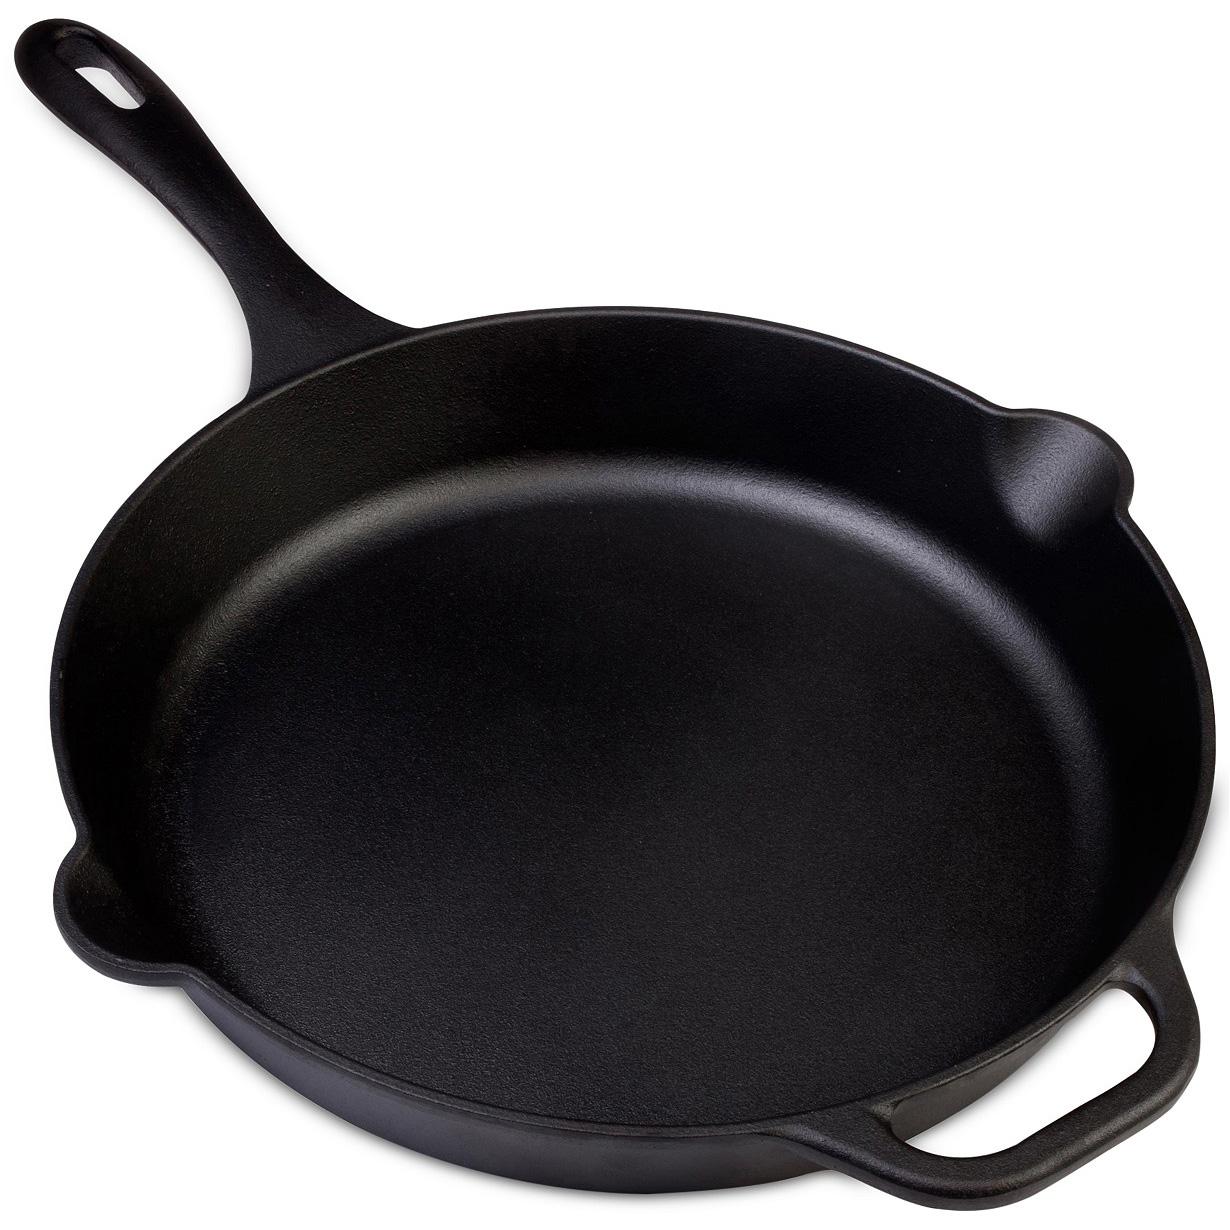 Victoria 12in Pre-Seasoned Cast Iron Skillet with Helper Handle for $13.99